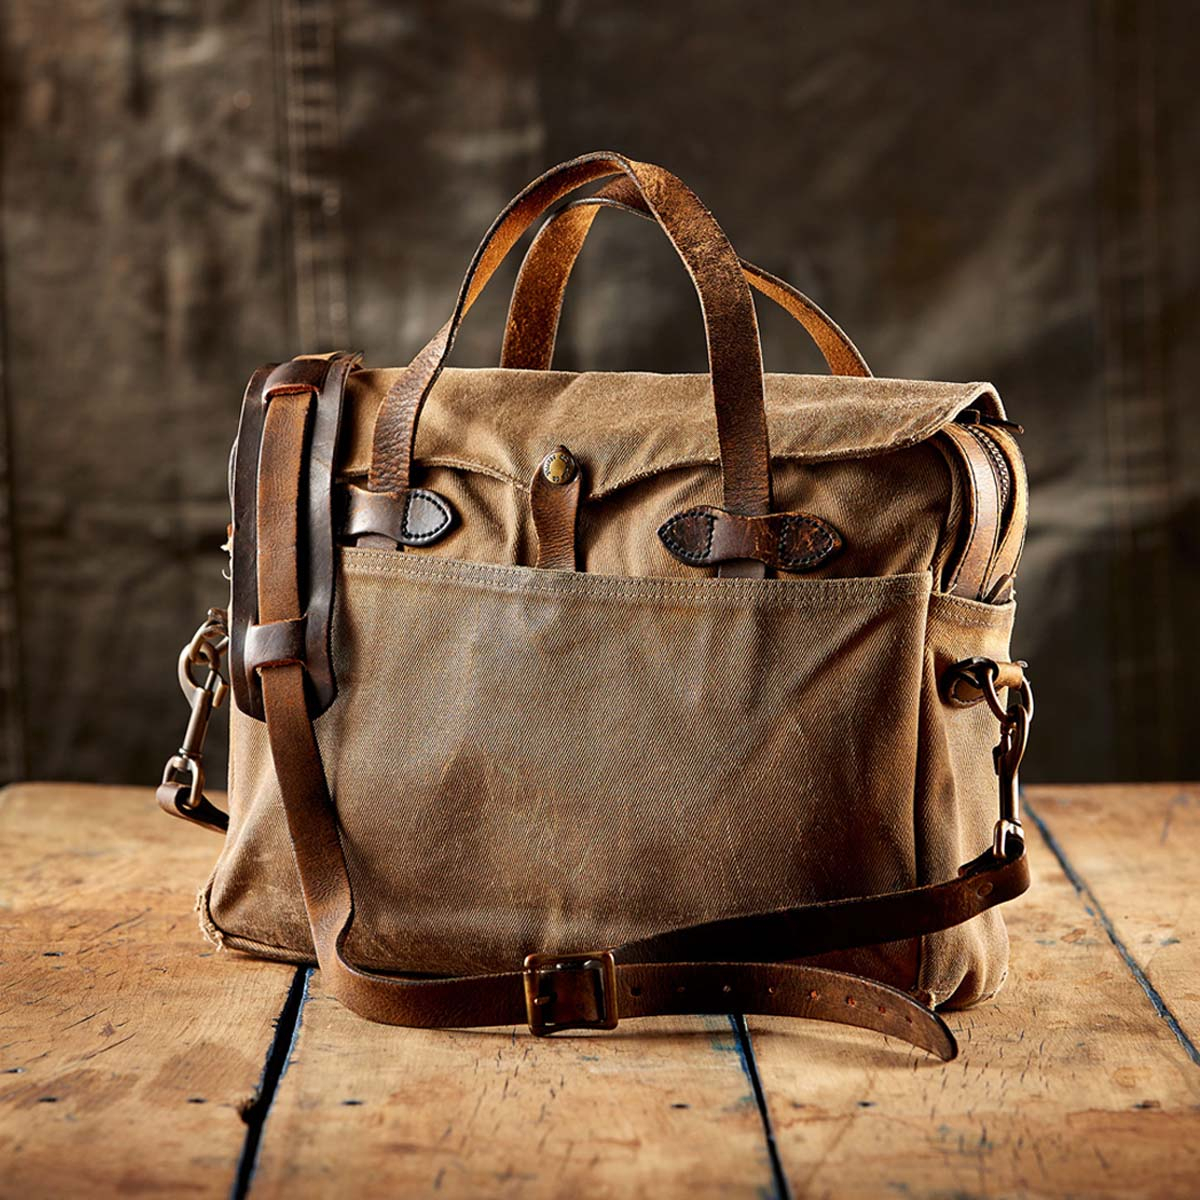 Filson Original Briefcase Lake Green, perfect bag with style and character